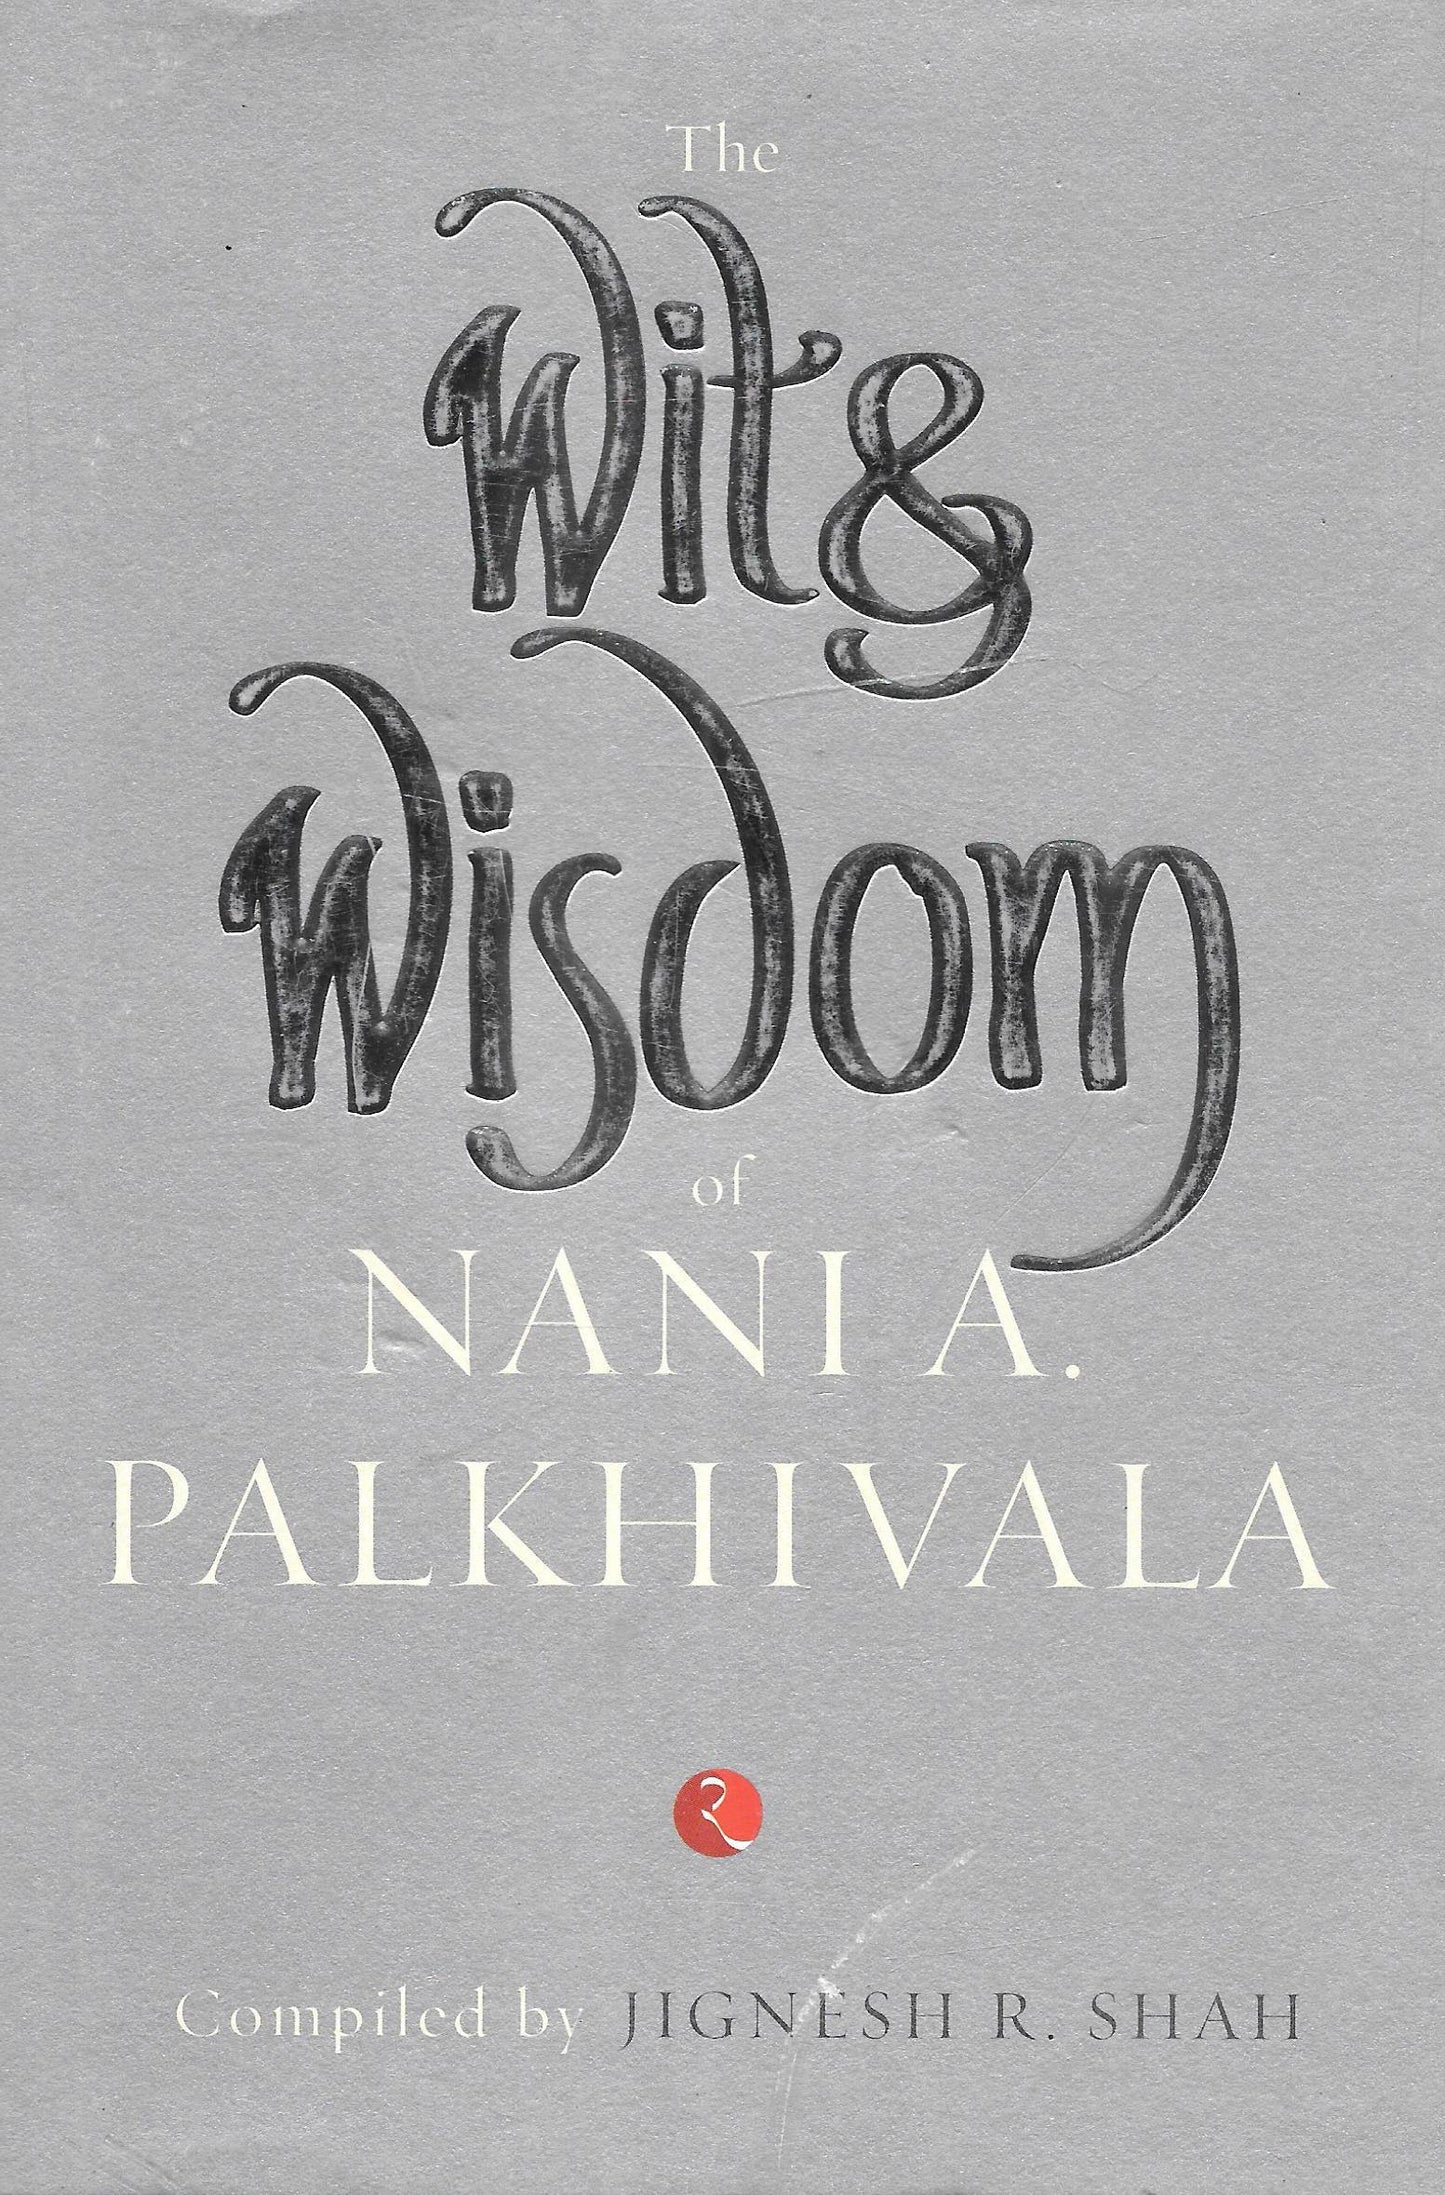 The Wits and Wisdom of Nani A. Palkhivala